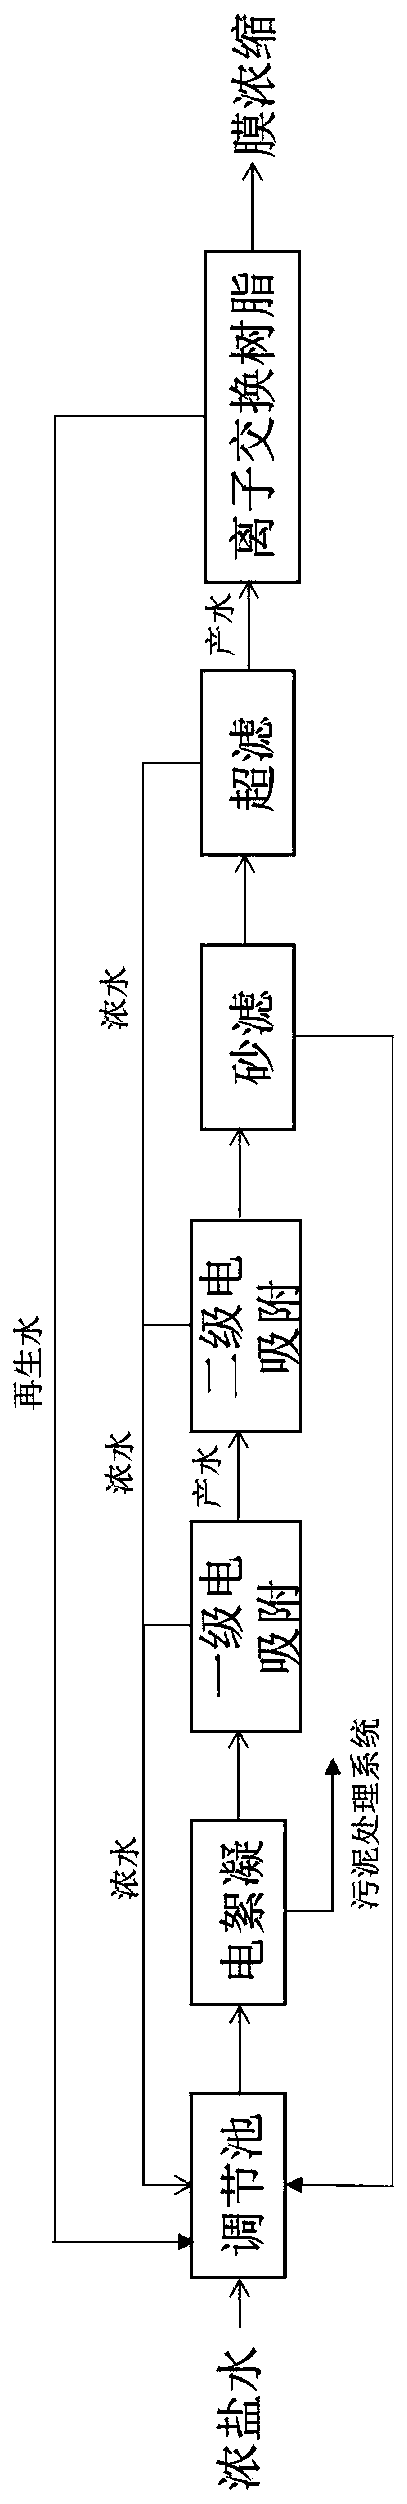 Pretreatment method for reduction of strong brine in iron and steel industry